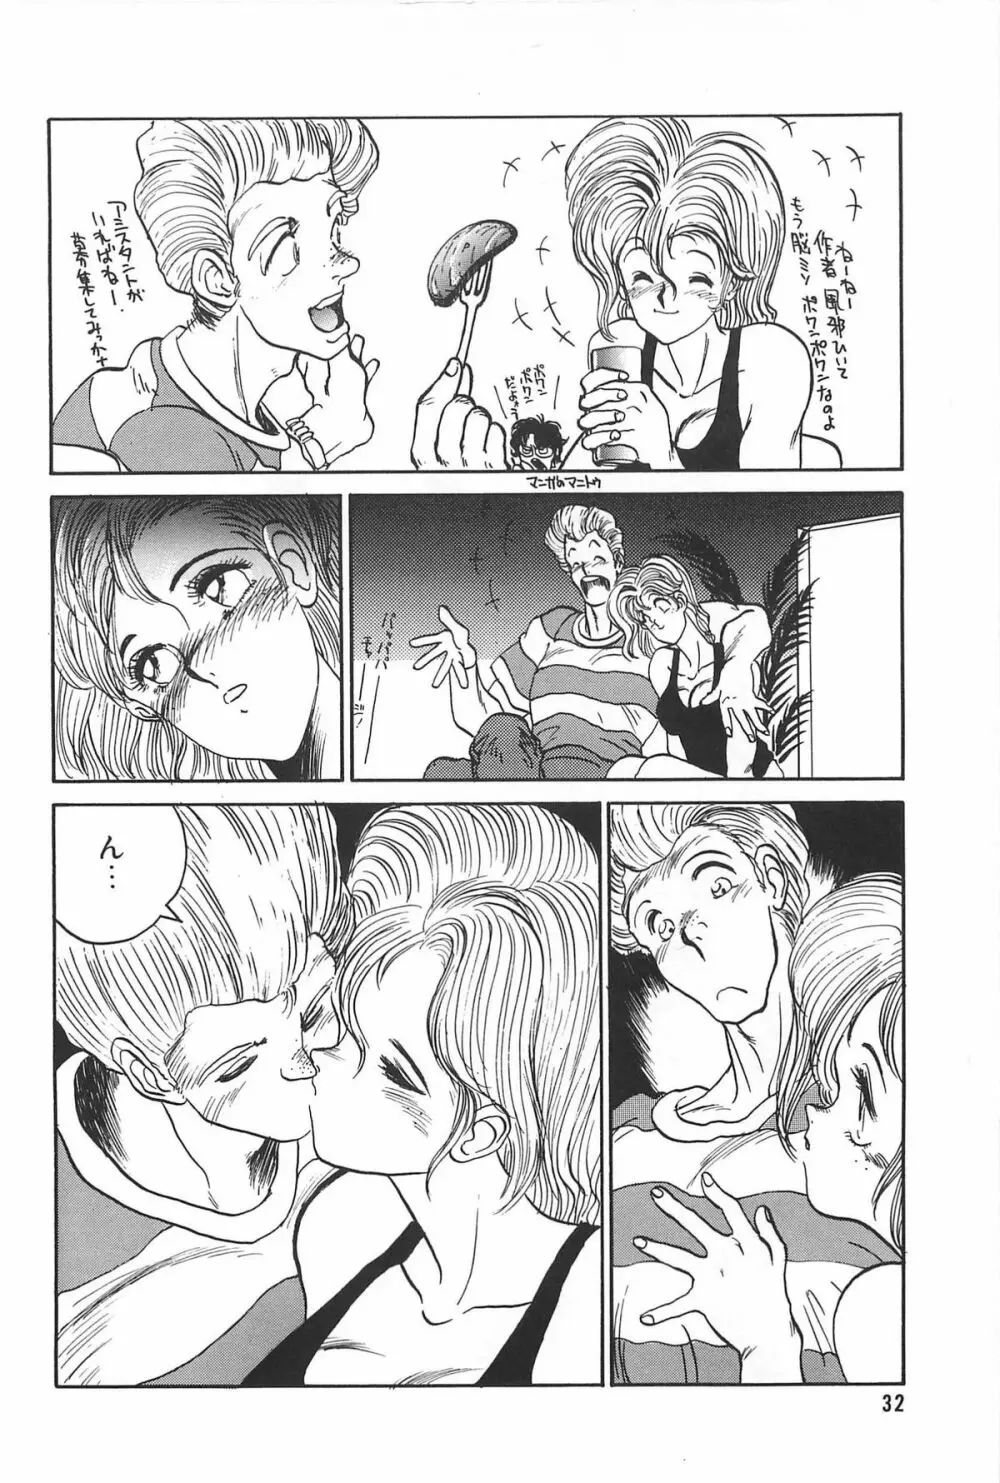 LOVE ME 1995 Page.34